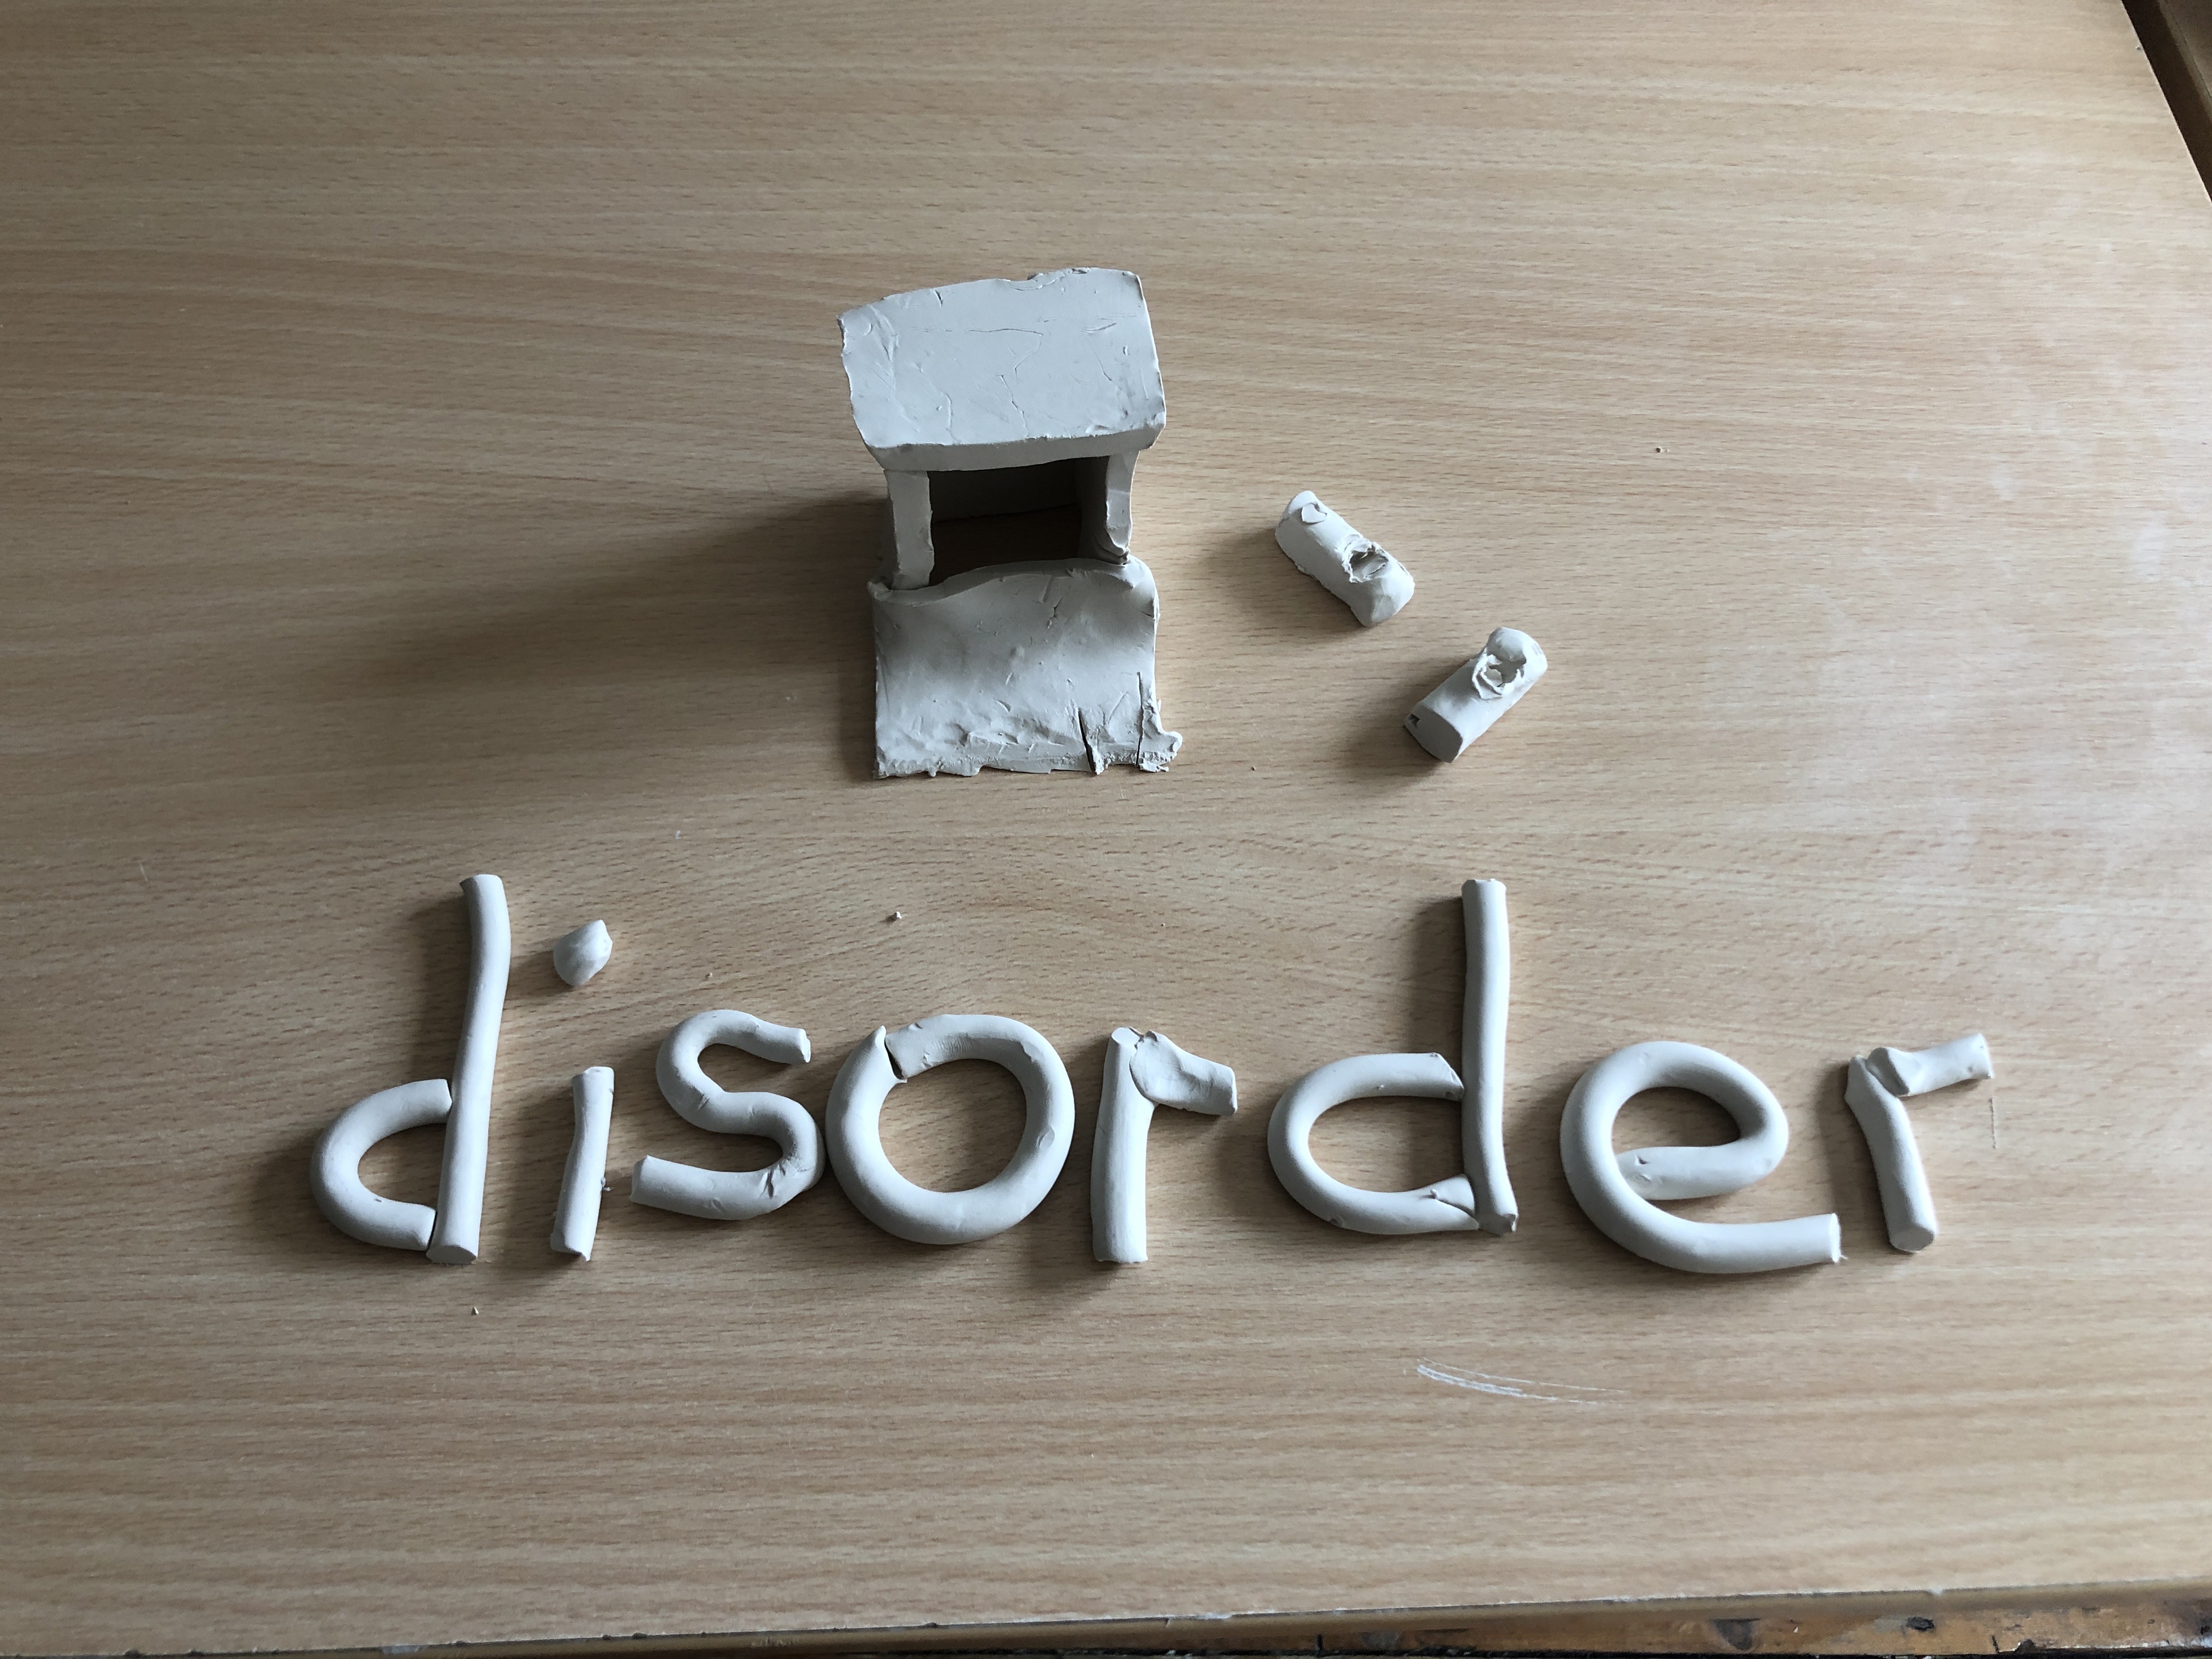 Disorder: when things are not in their proper place, condition or position.